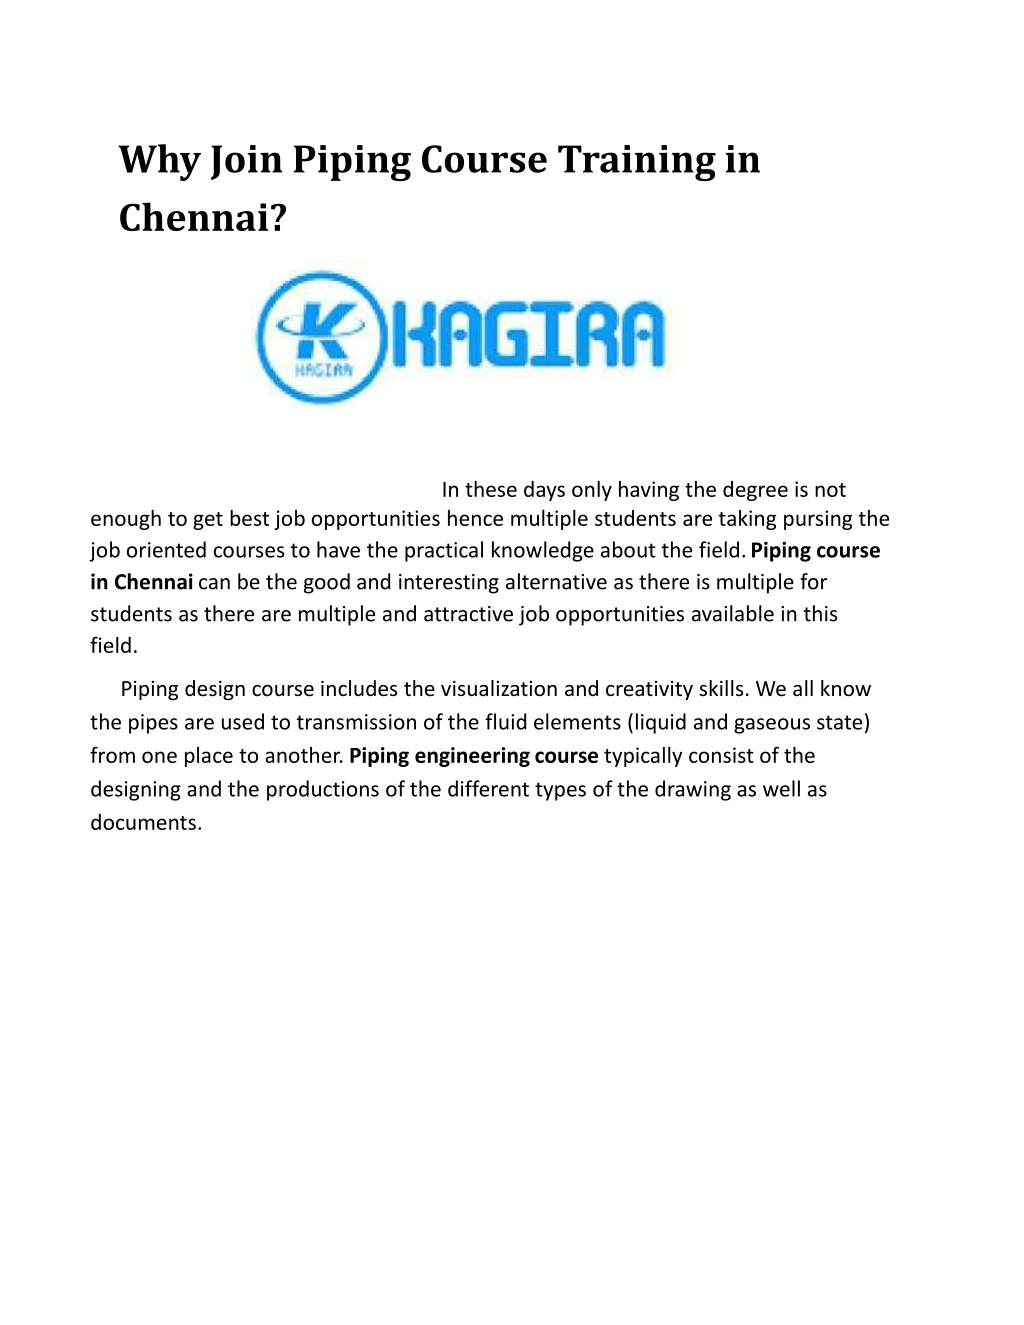 why join piping course training in chennai